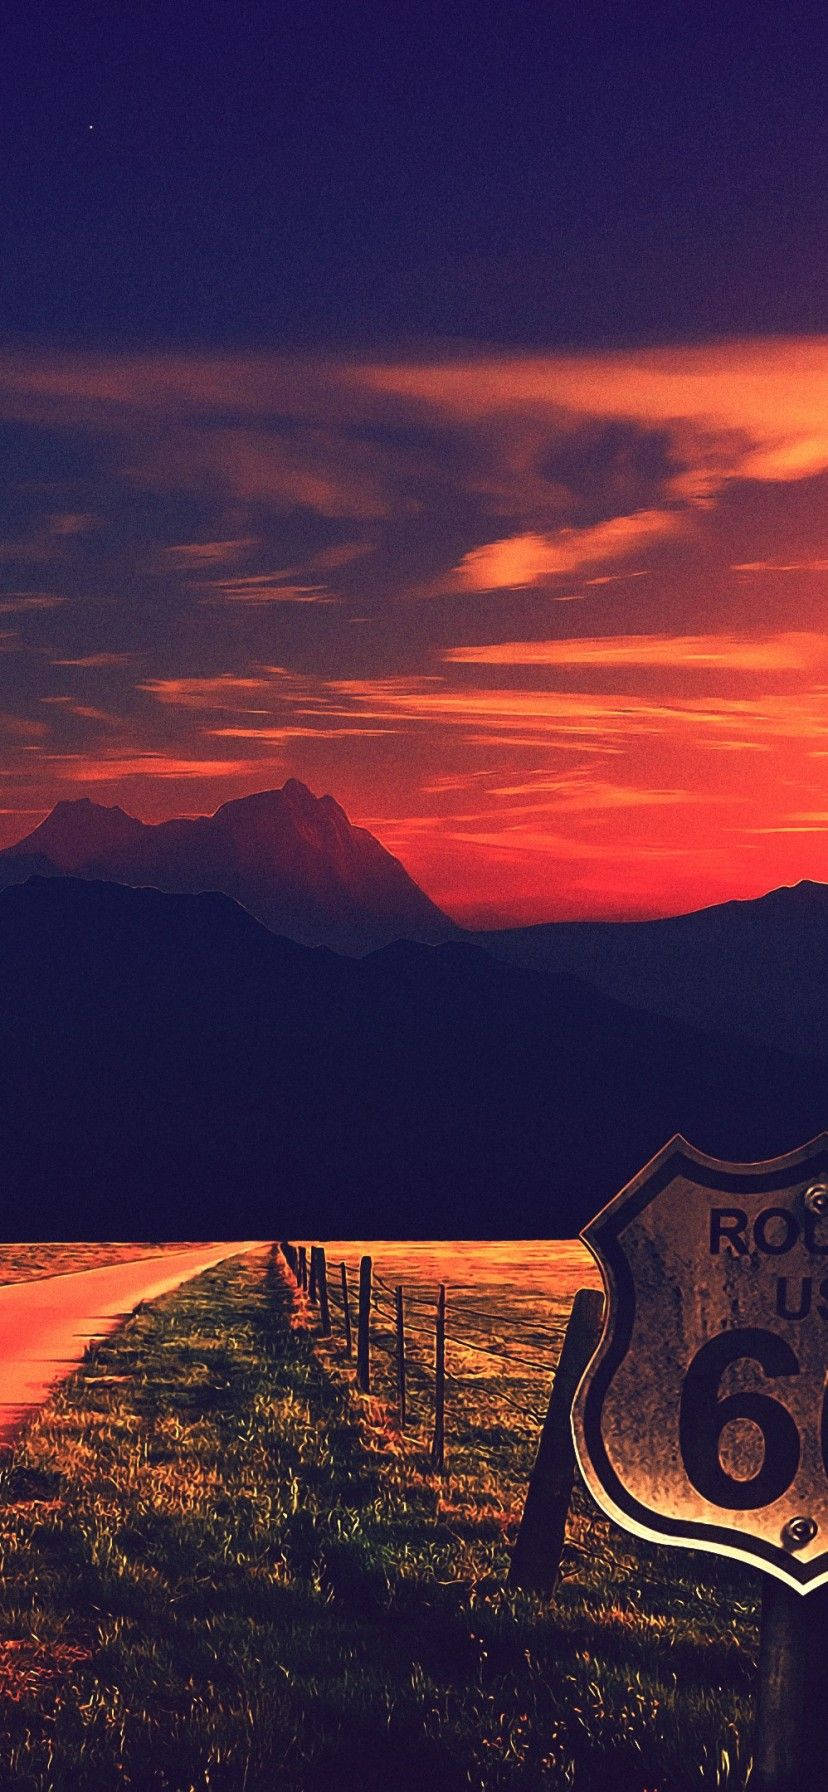 Iphone Xr Route 66 Sunset Wallpaper